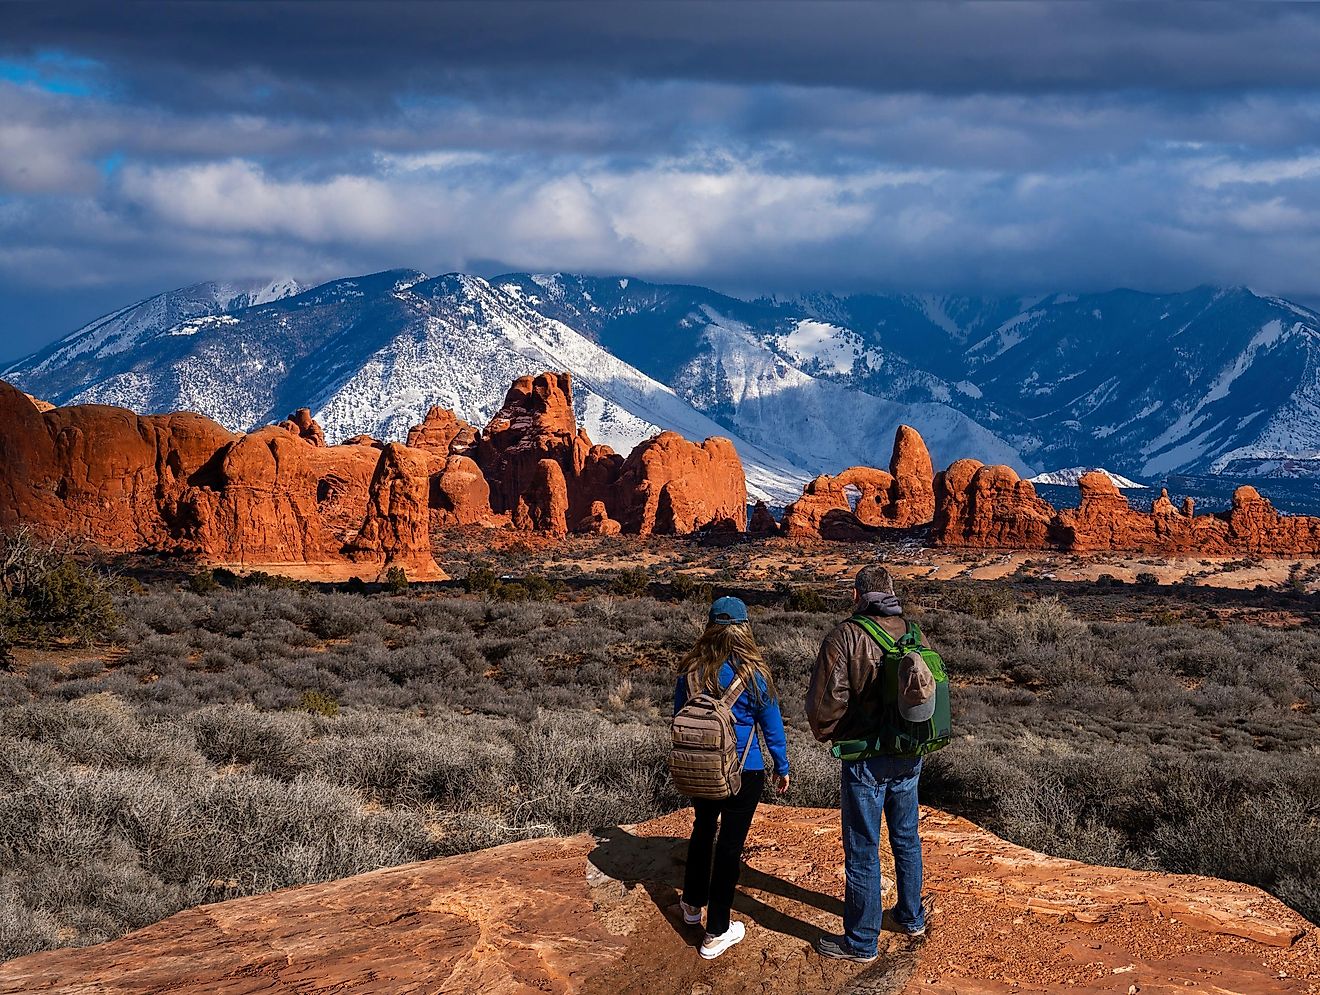 Couple enjoying beautiful mountain view on hiking trip in Utah. The Windows Section of the park, snow covered La Sal Mountains in the background. Arches National Park ,Moab, Utah.